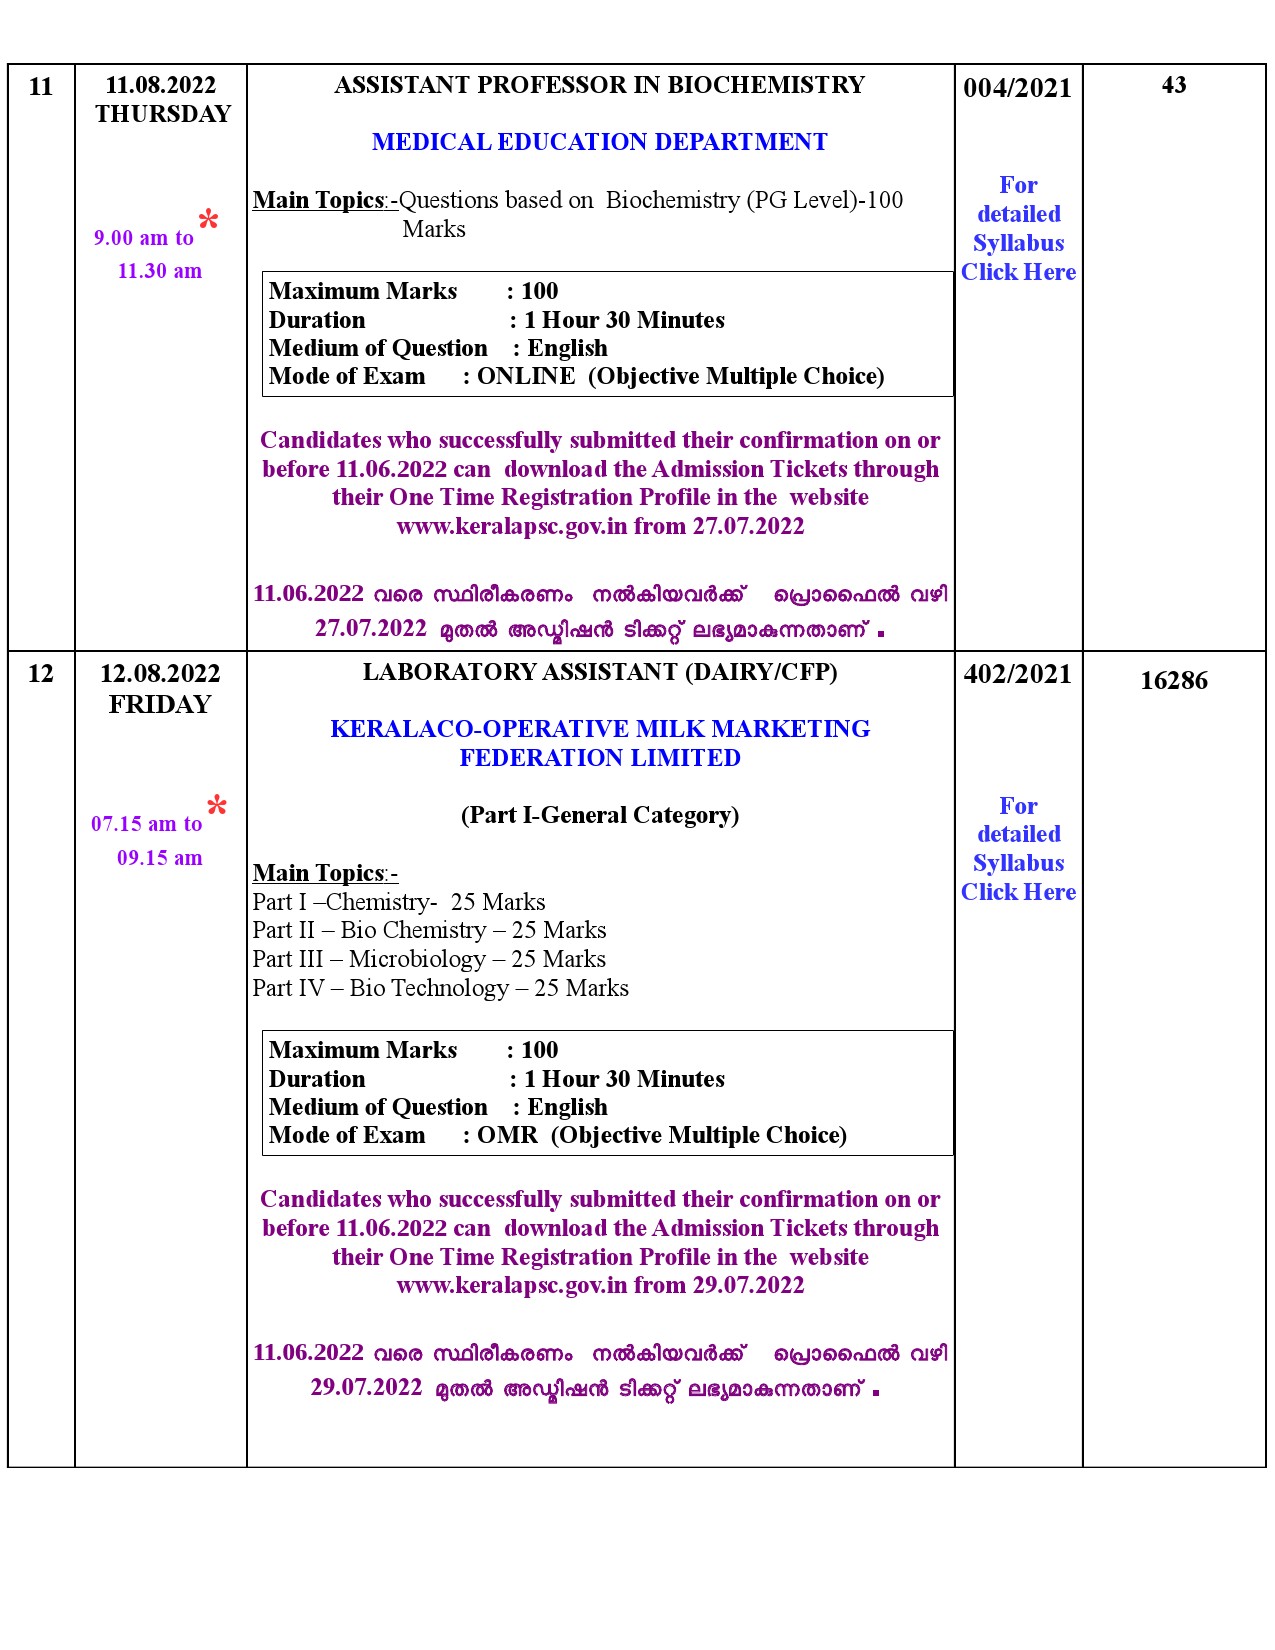 Examination Programme For The Month Of August 2022 - Notification Image 6